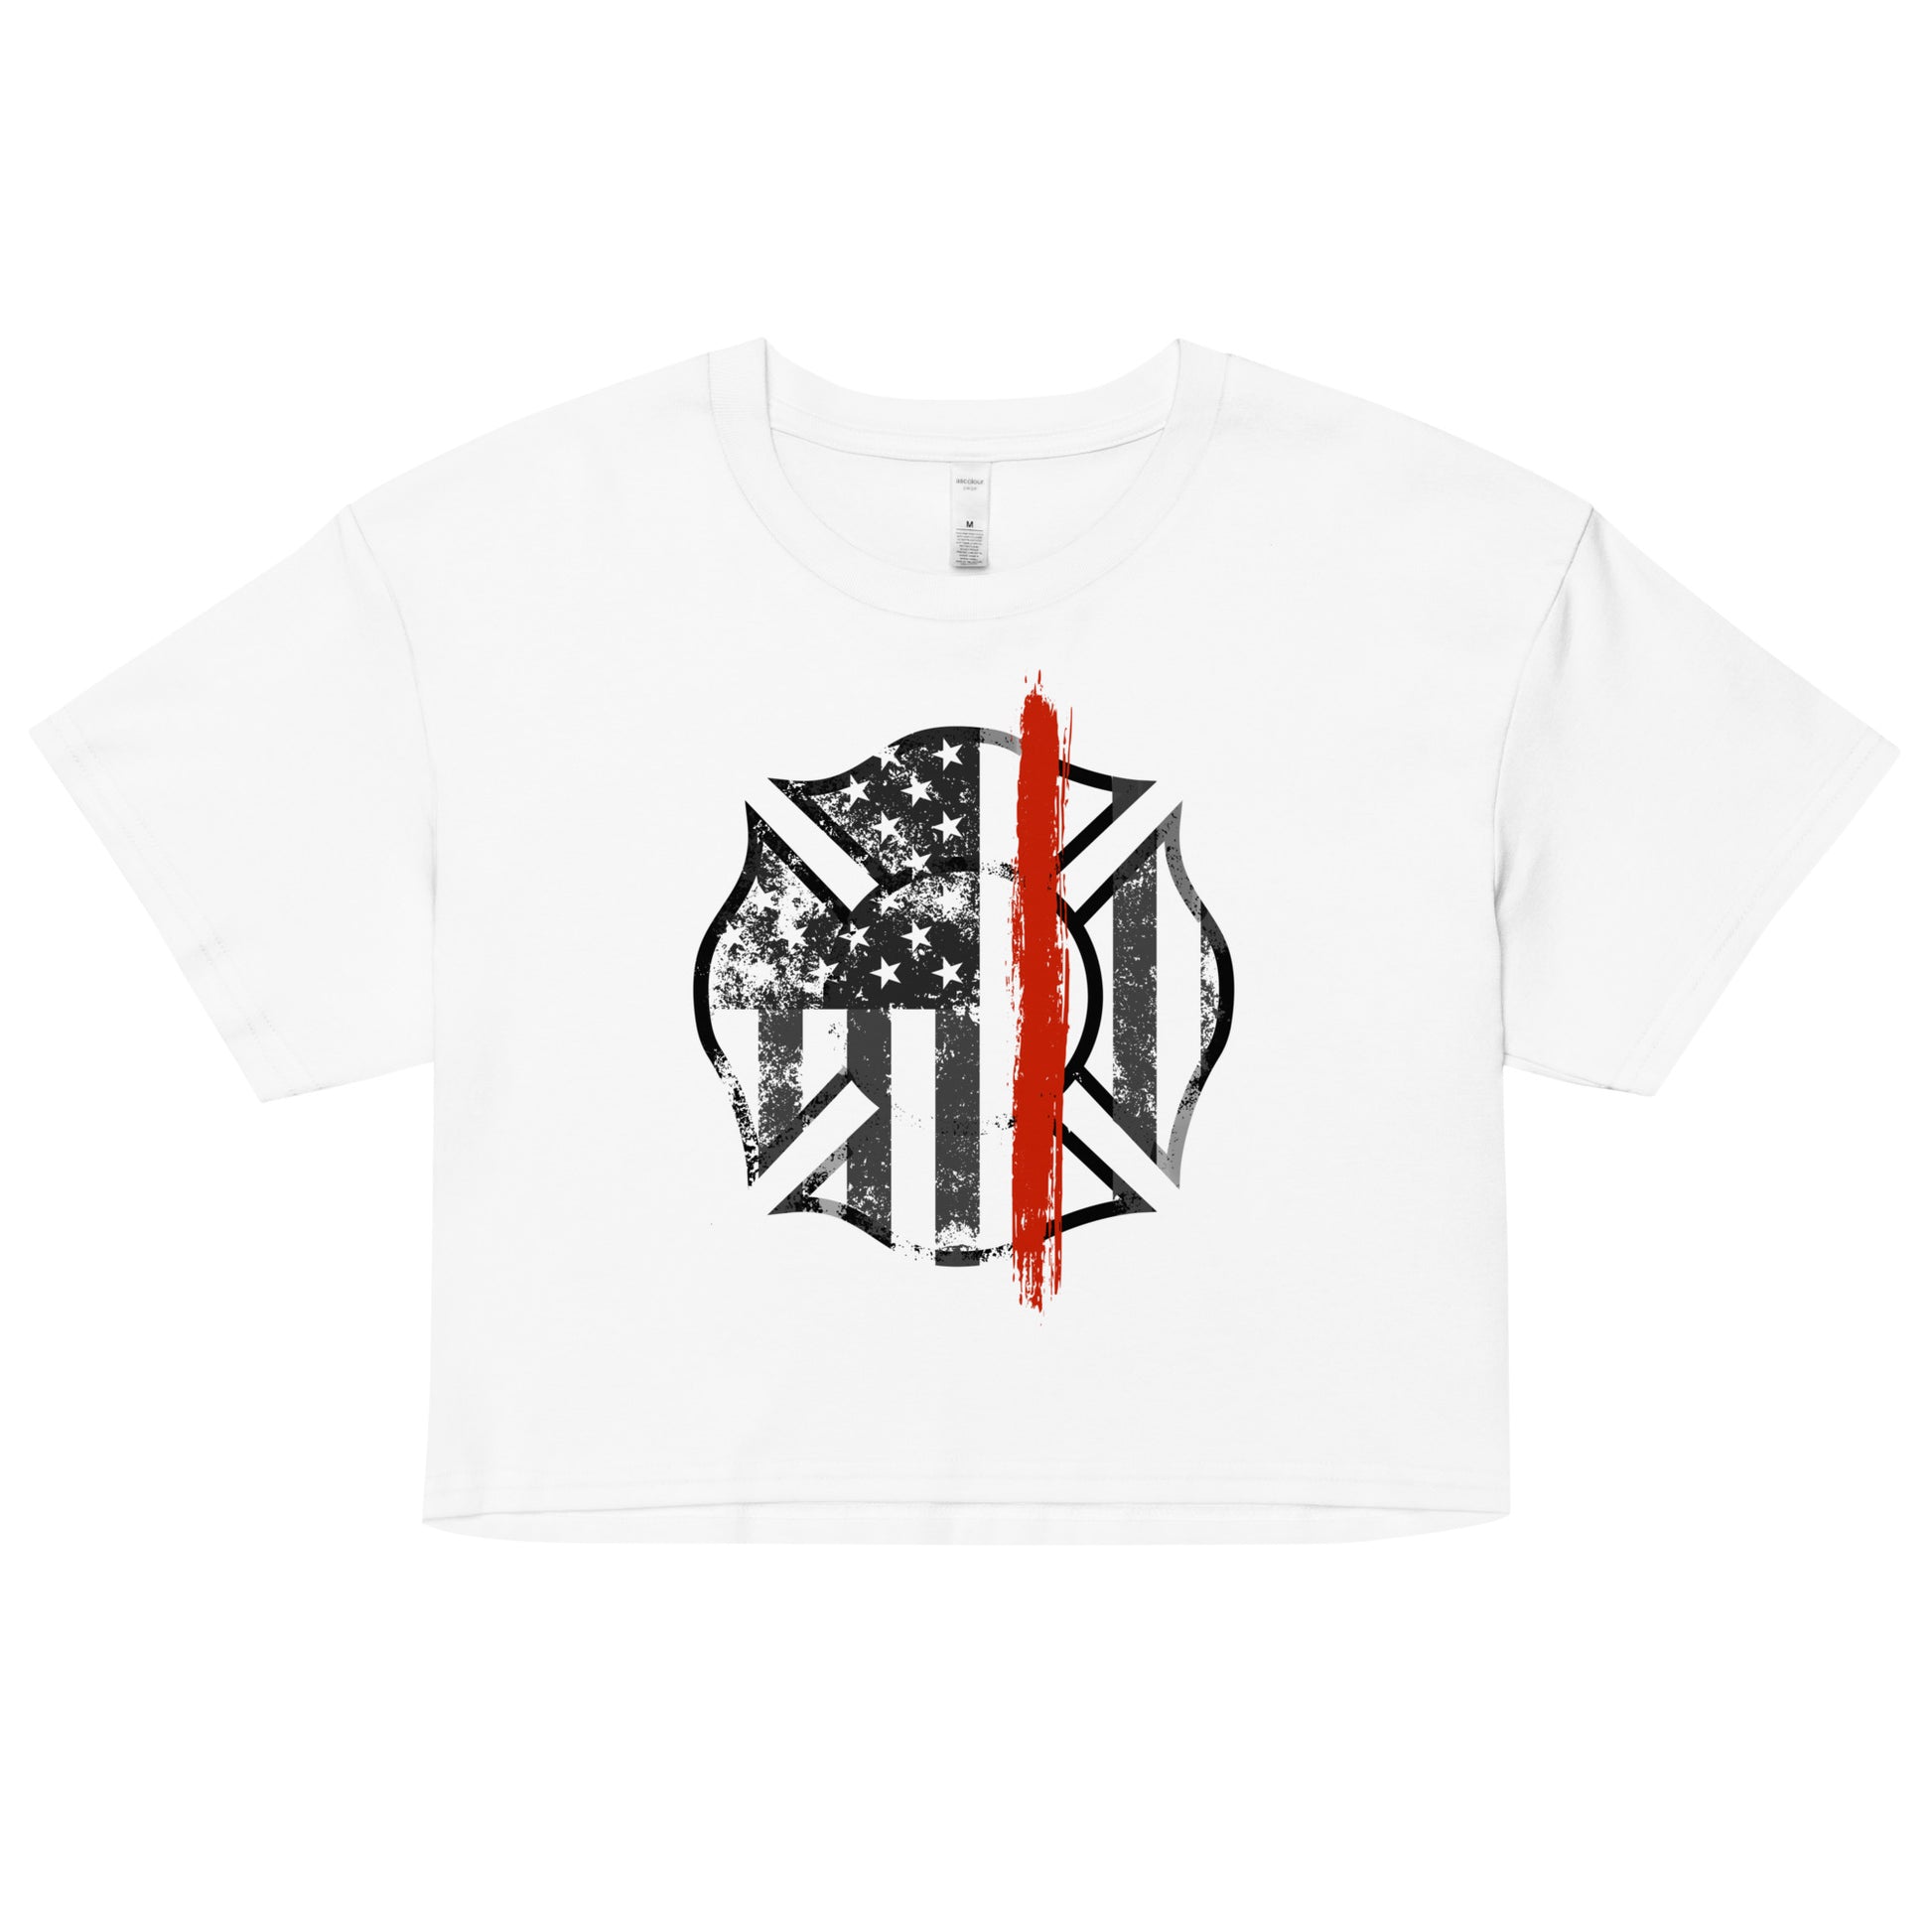 Back the Red women's crop top. Firefighter Thin Red Line shirt in white.